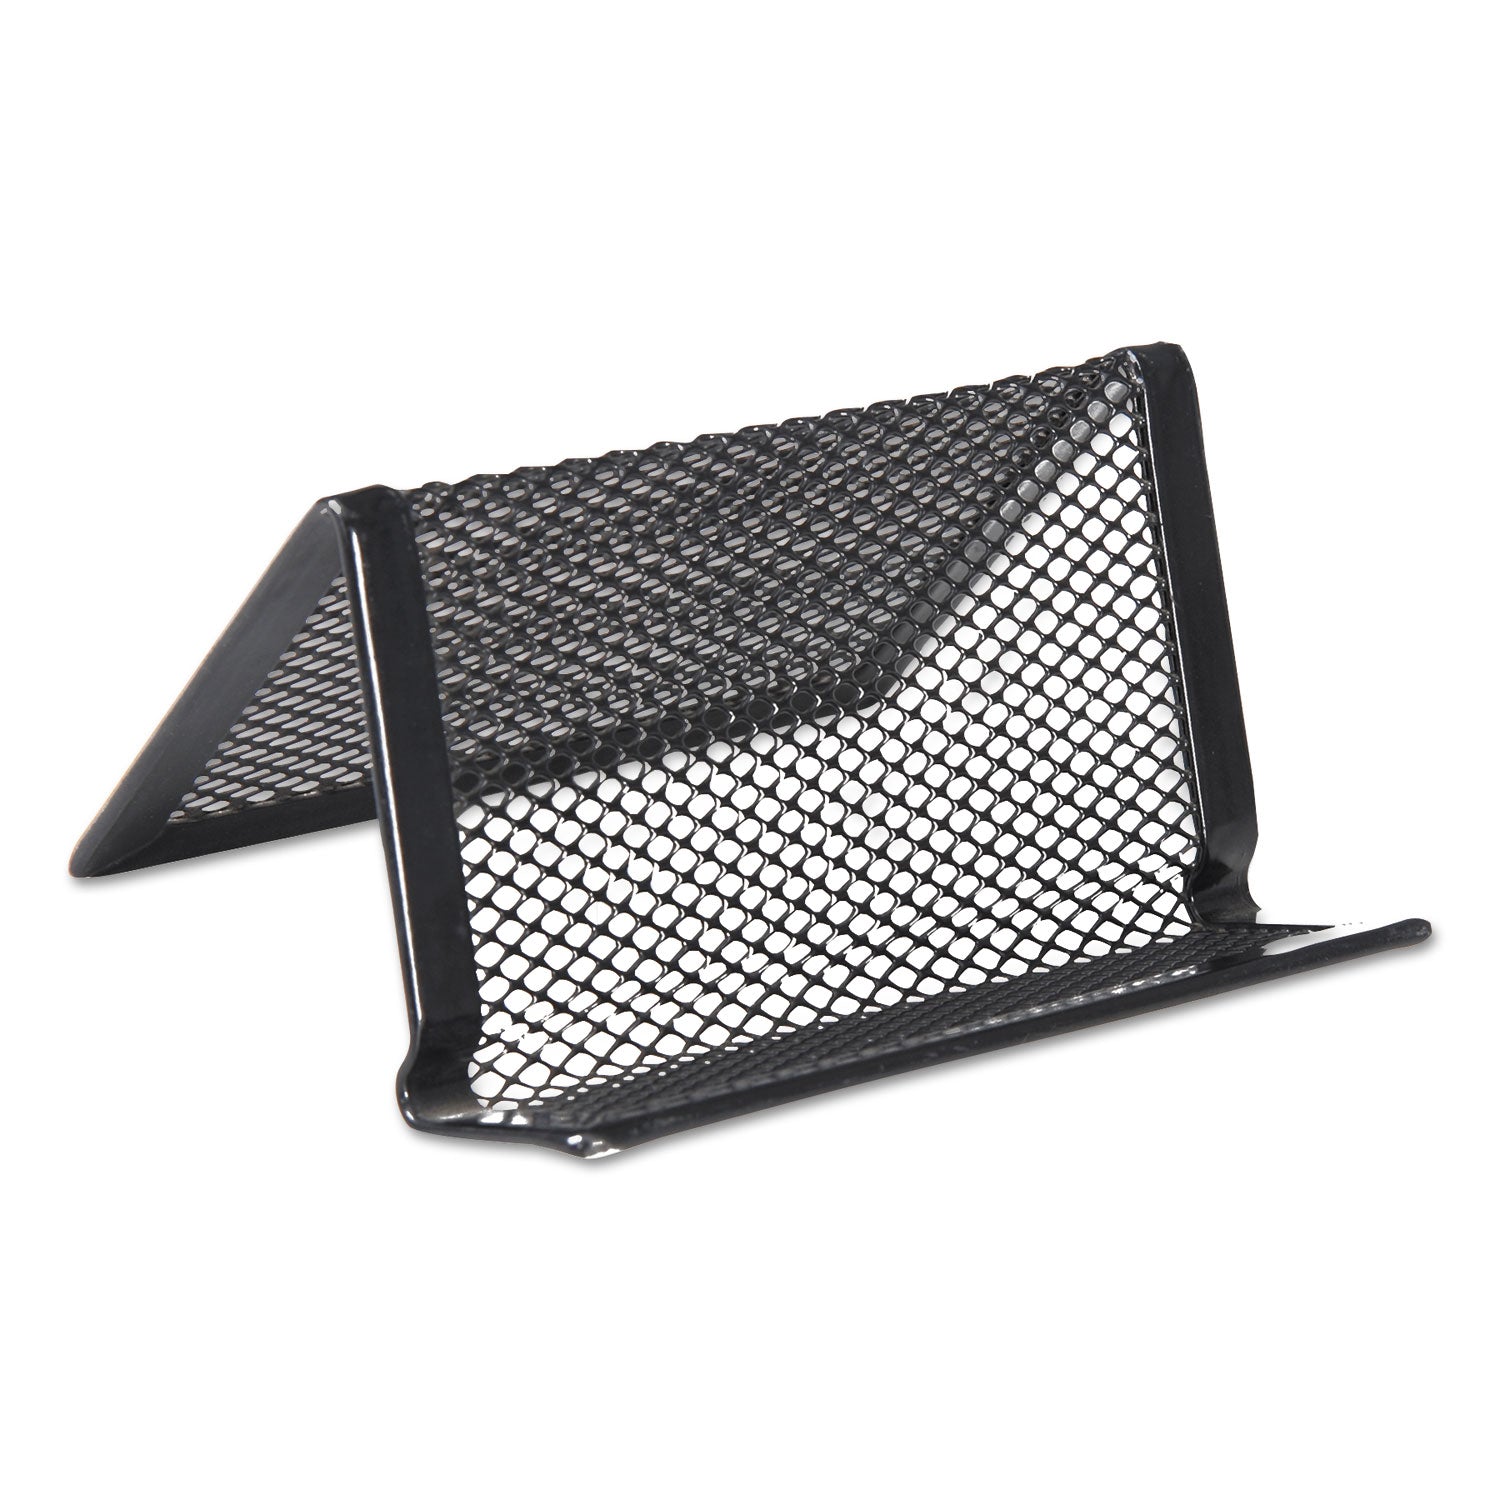 Mesh Metal Business Card Holder, Holds 50 2.25 x 4 Cards, 3.78 x 3.38 x 2.13, Black - 